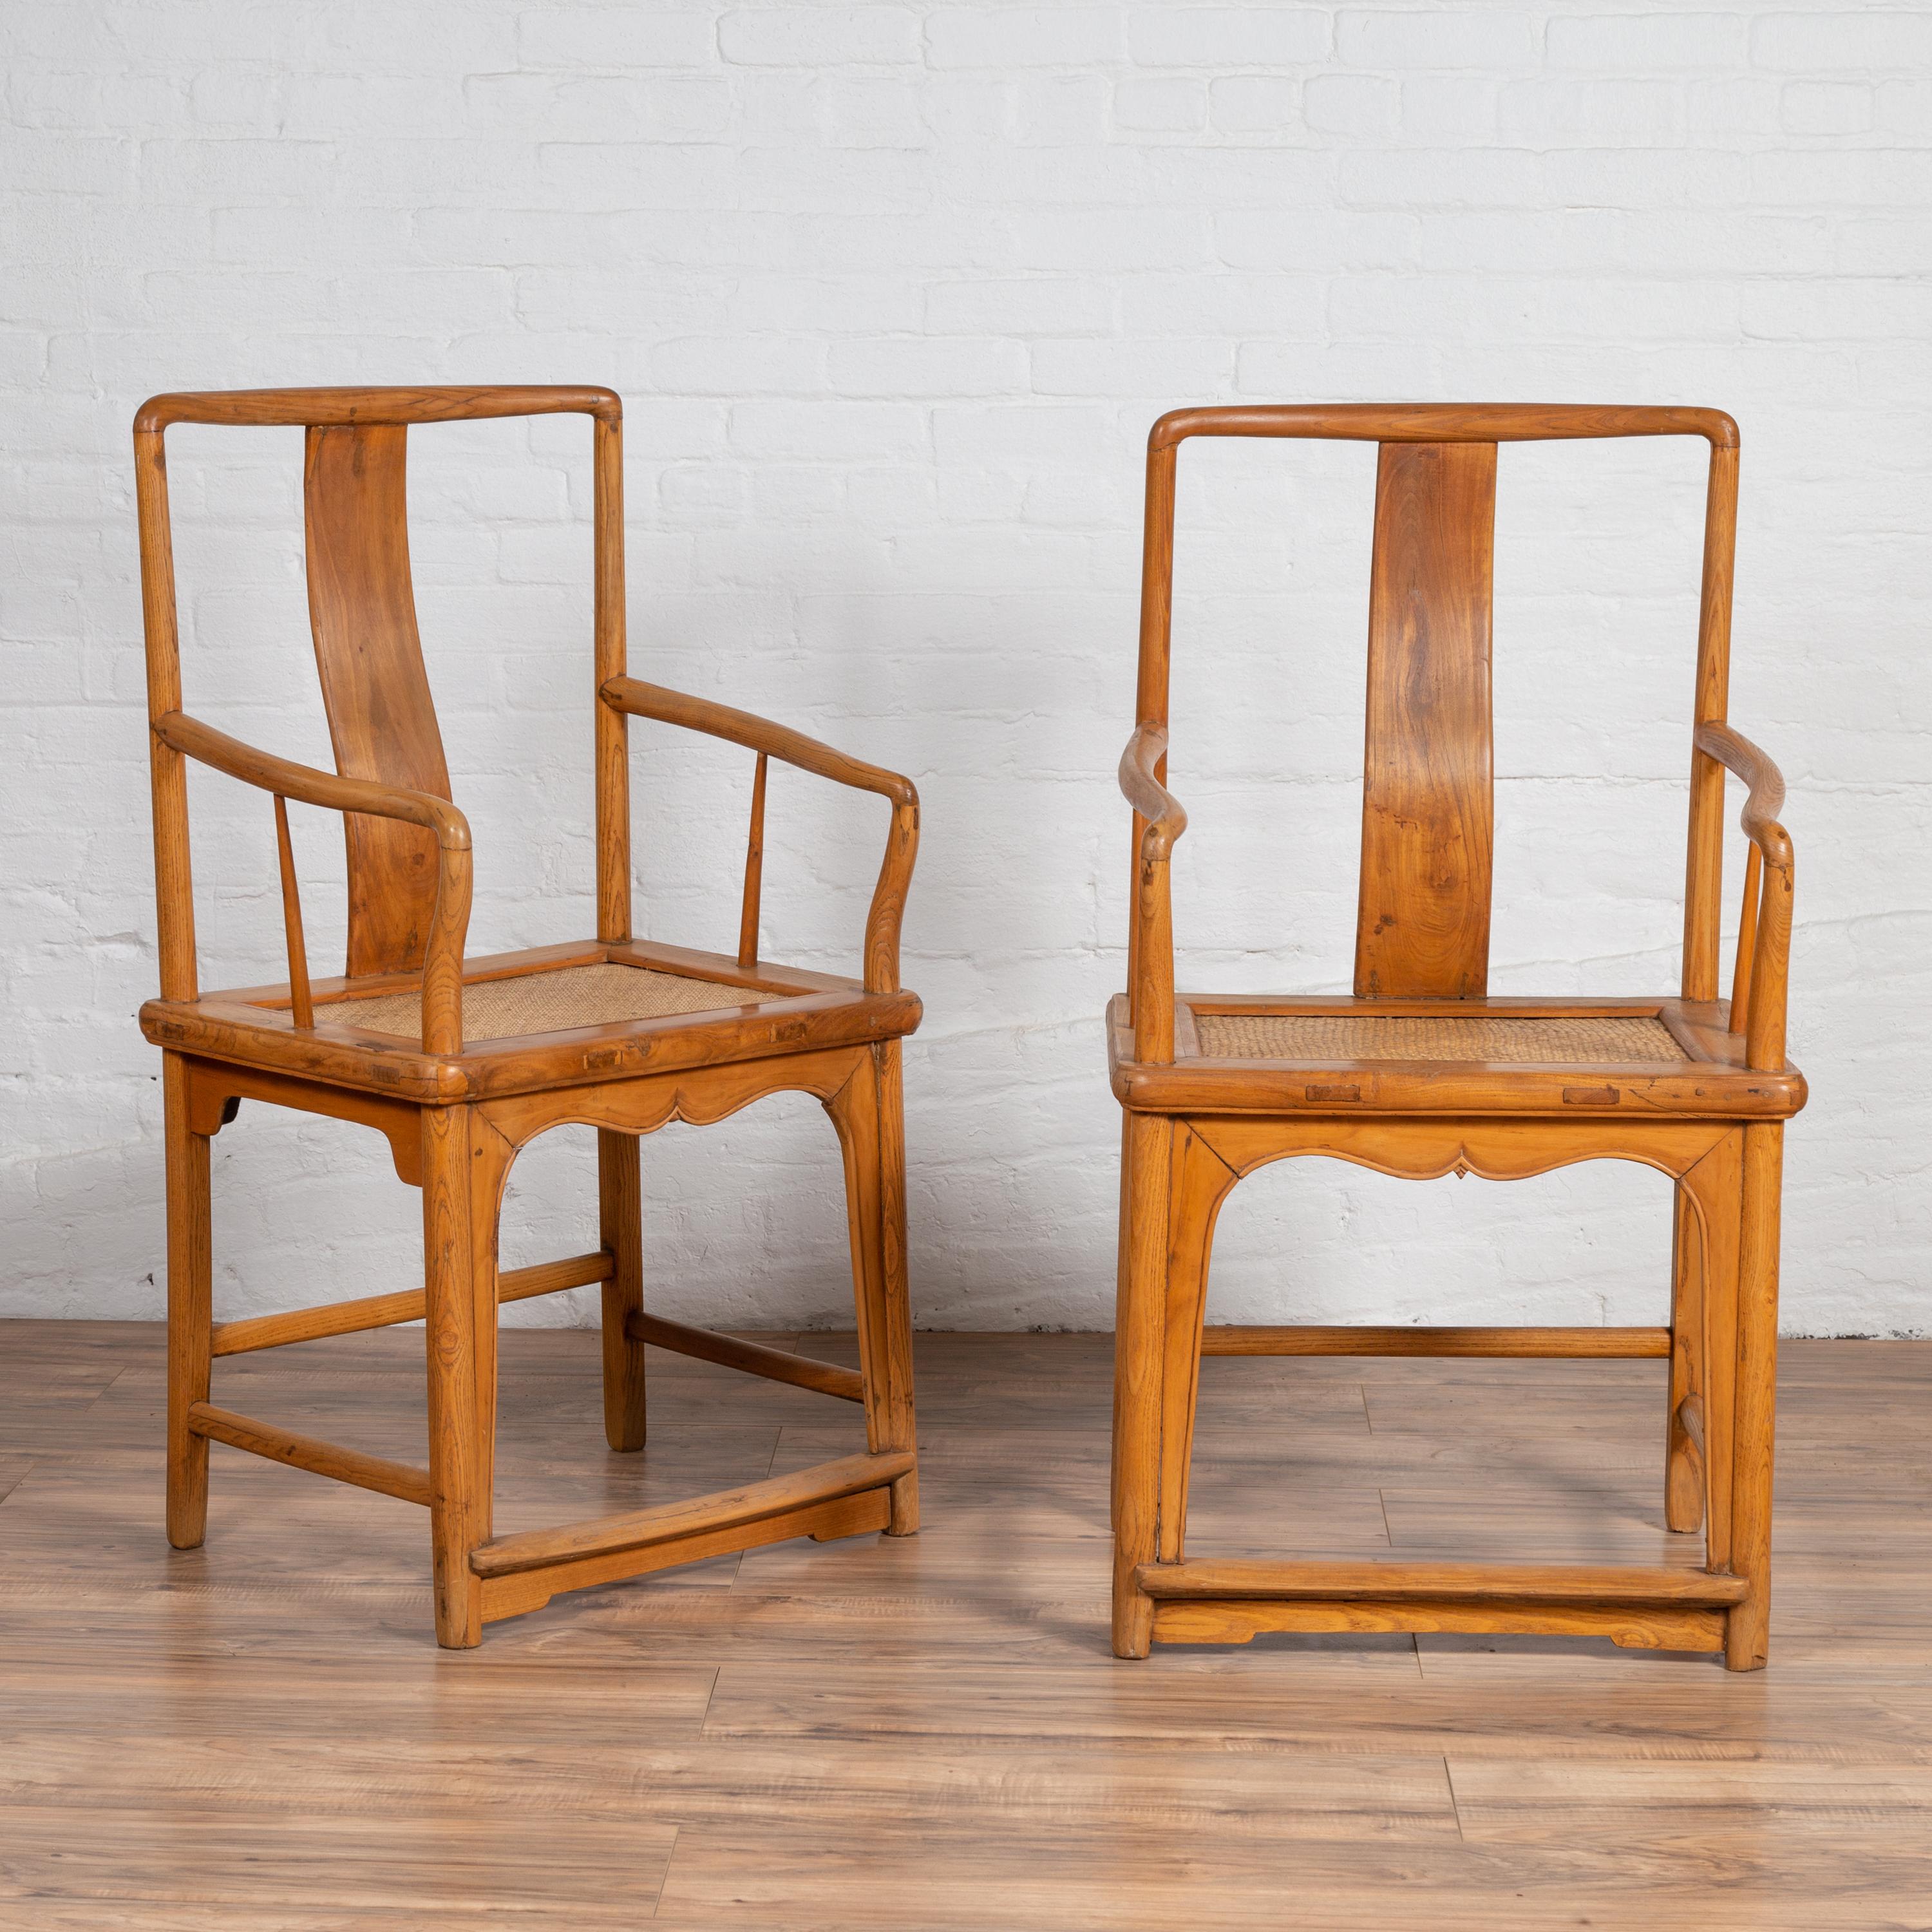 A near pair of Chinese Ming dynasty style vintage wedding armchairs from the mid-20th century, with woven rattan seats, curving armrests and natural wood patina. Born in China during the midcentury period, each of this near pair (they present slight